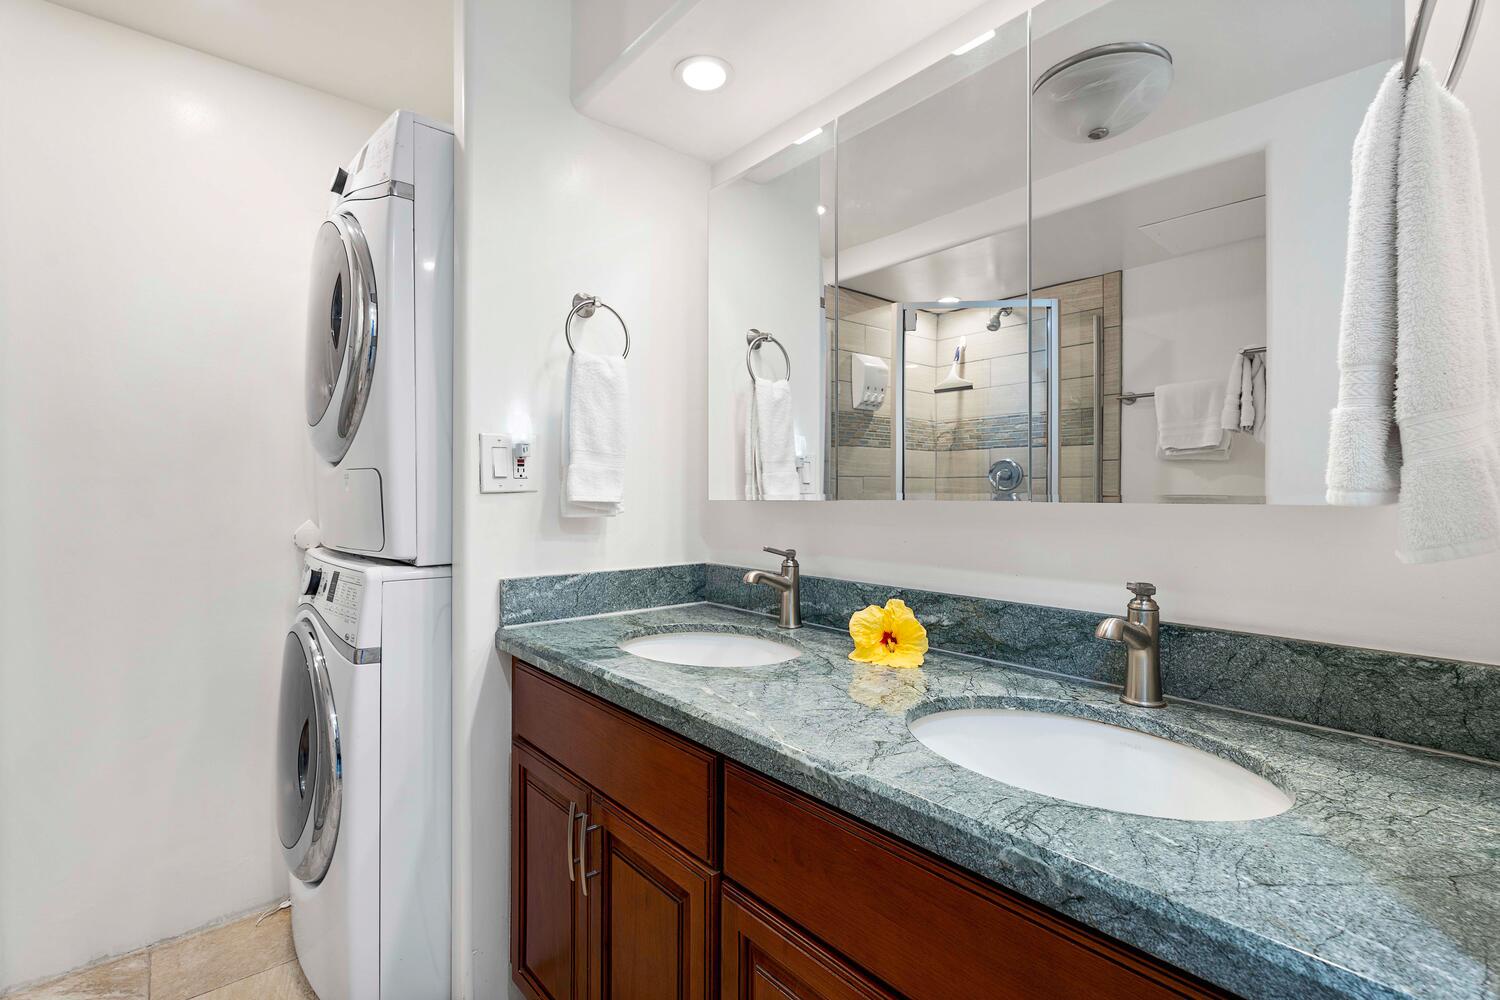 Kailua Kona Vacation Rentals, Kona Alii 403 - The shared guest bathroom with dual vanities and a walk-in shower.